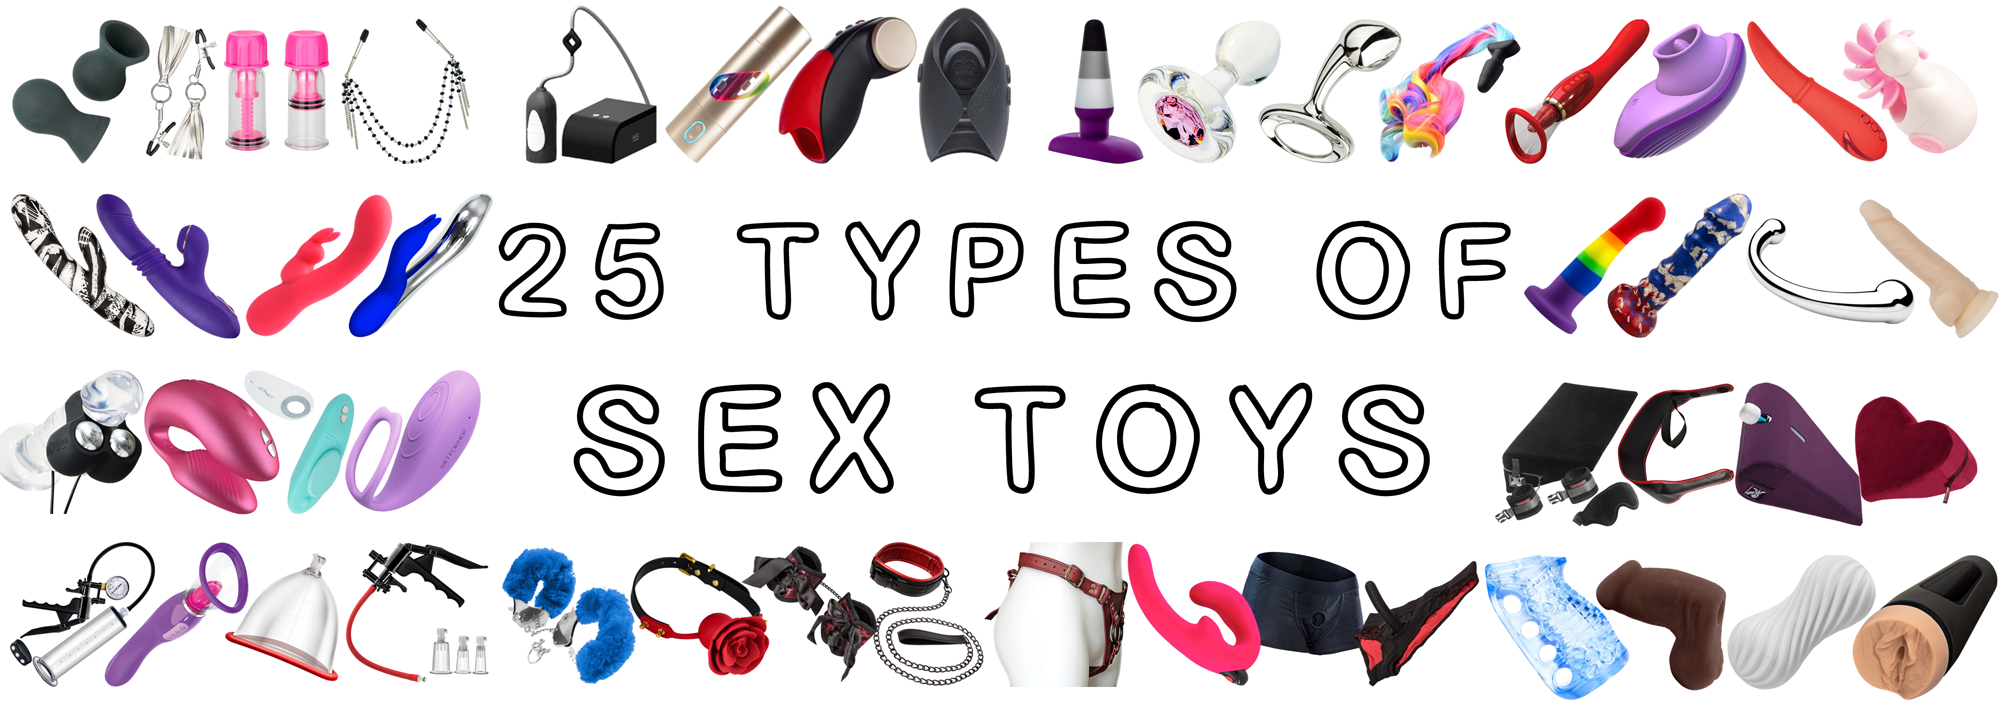 25 Types of Sex Toys A Guide to Help You Know Whats Out There picture